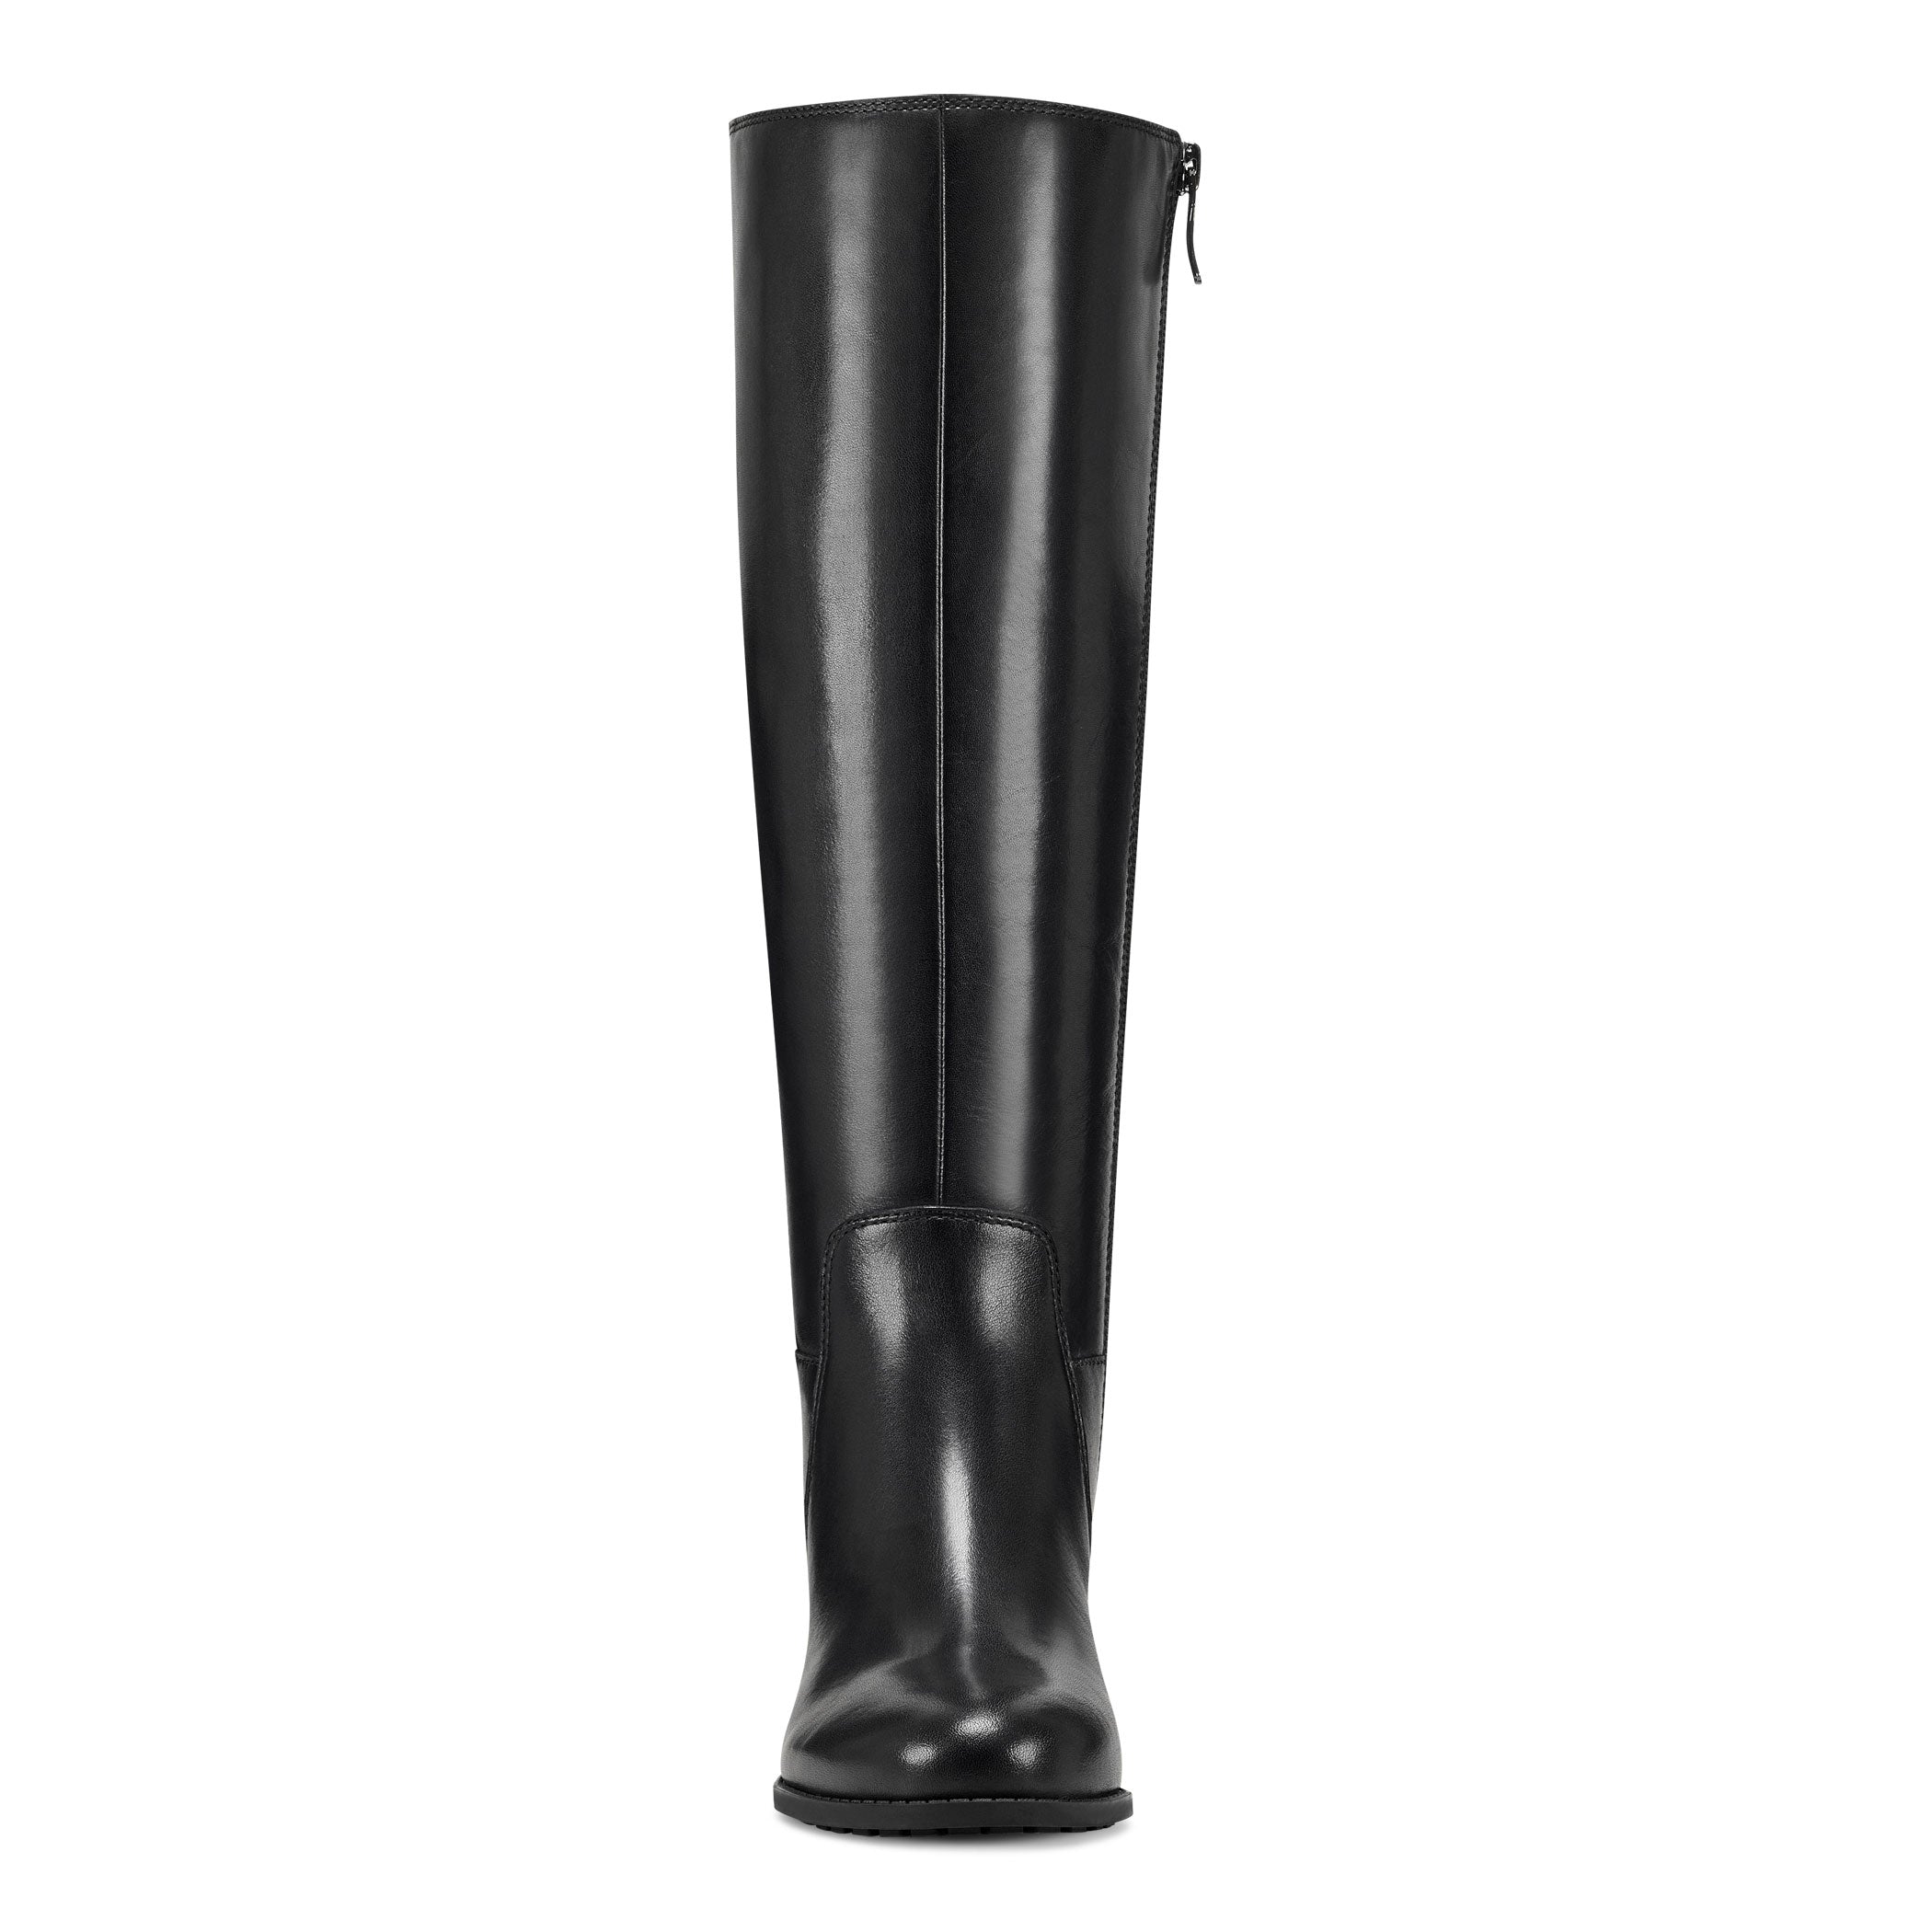 Chaza Wide Calf Tall Boots